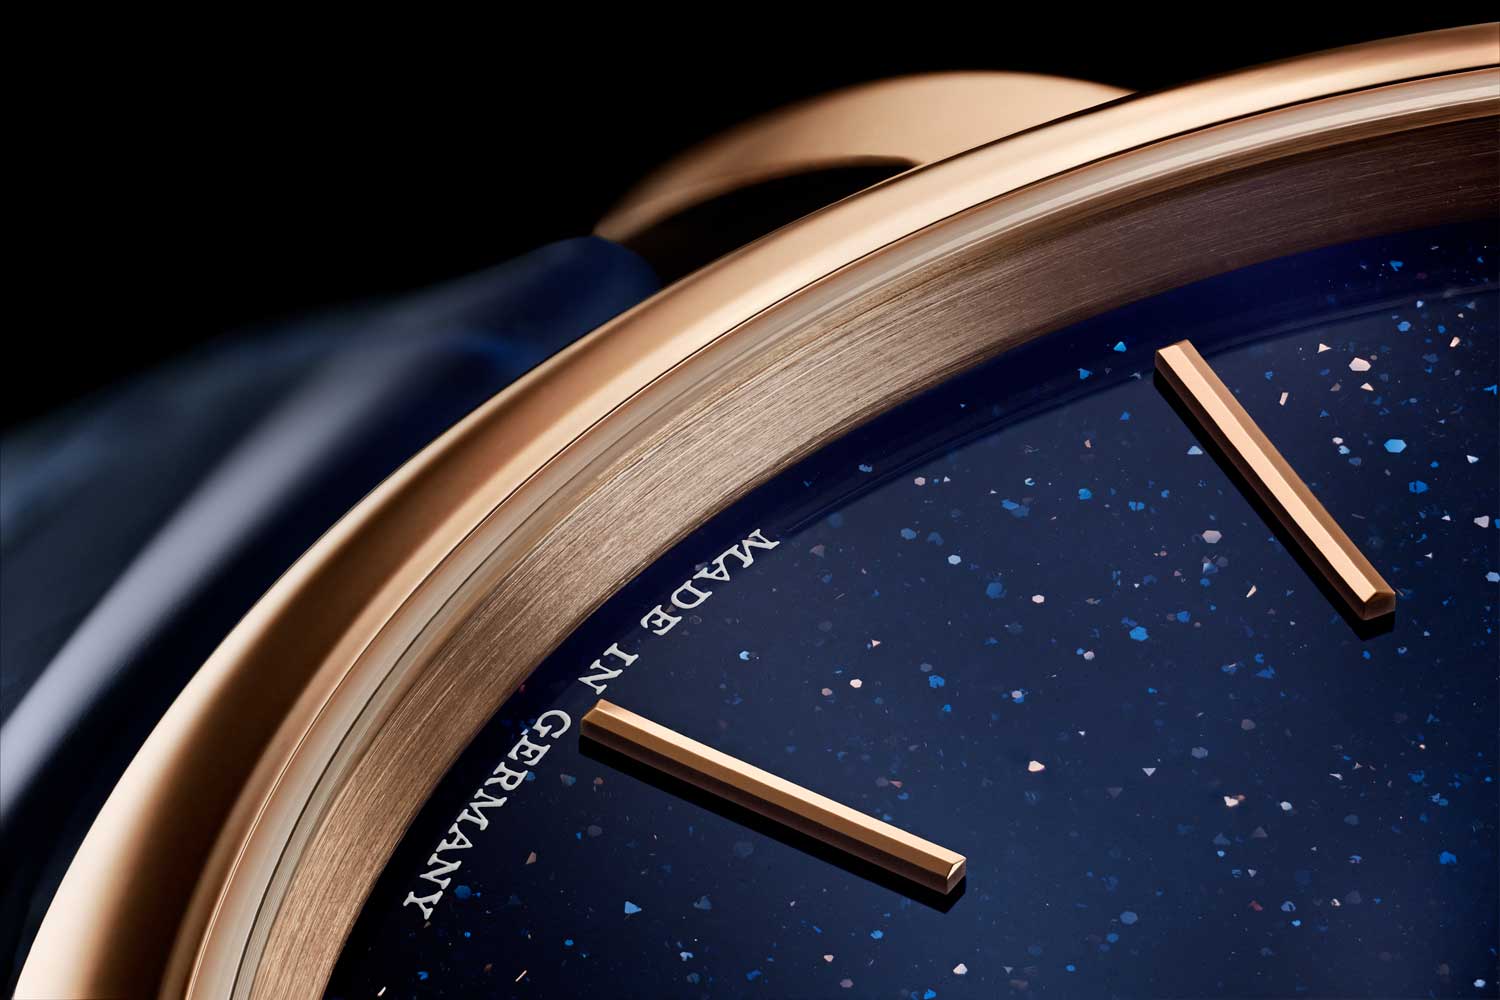 The dial of the 2021 A. Lange & Söhne Saxonia Thin, ref. 211.088 is achieved by infusing molten glass with minuscule copper particles over a flame, where its intensity is gradually decreased so what you end up with is a clear substance bespeckled with the flakes of copper that play in the light to give this starry night impression